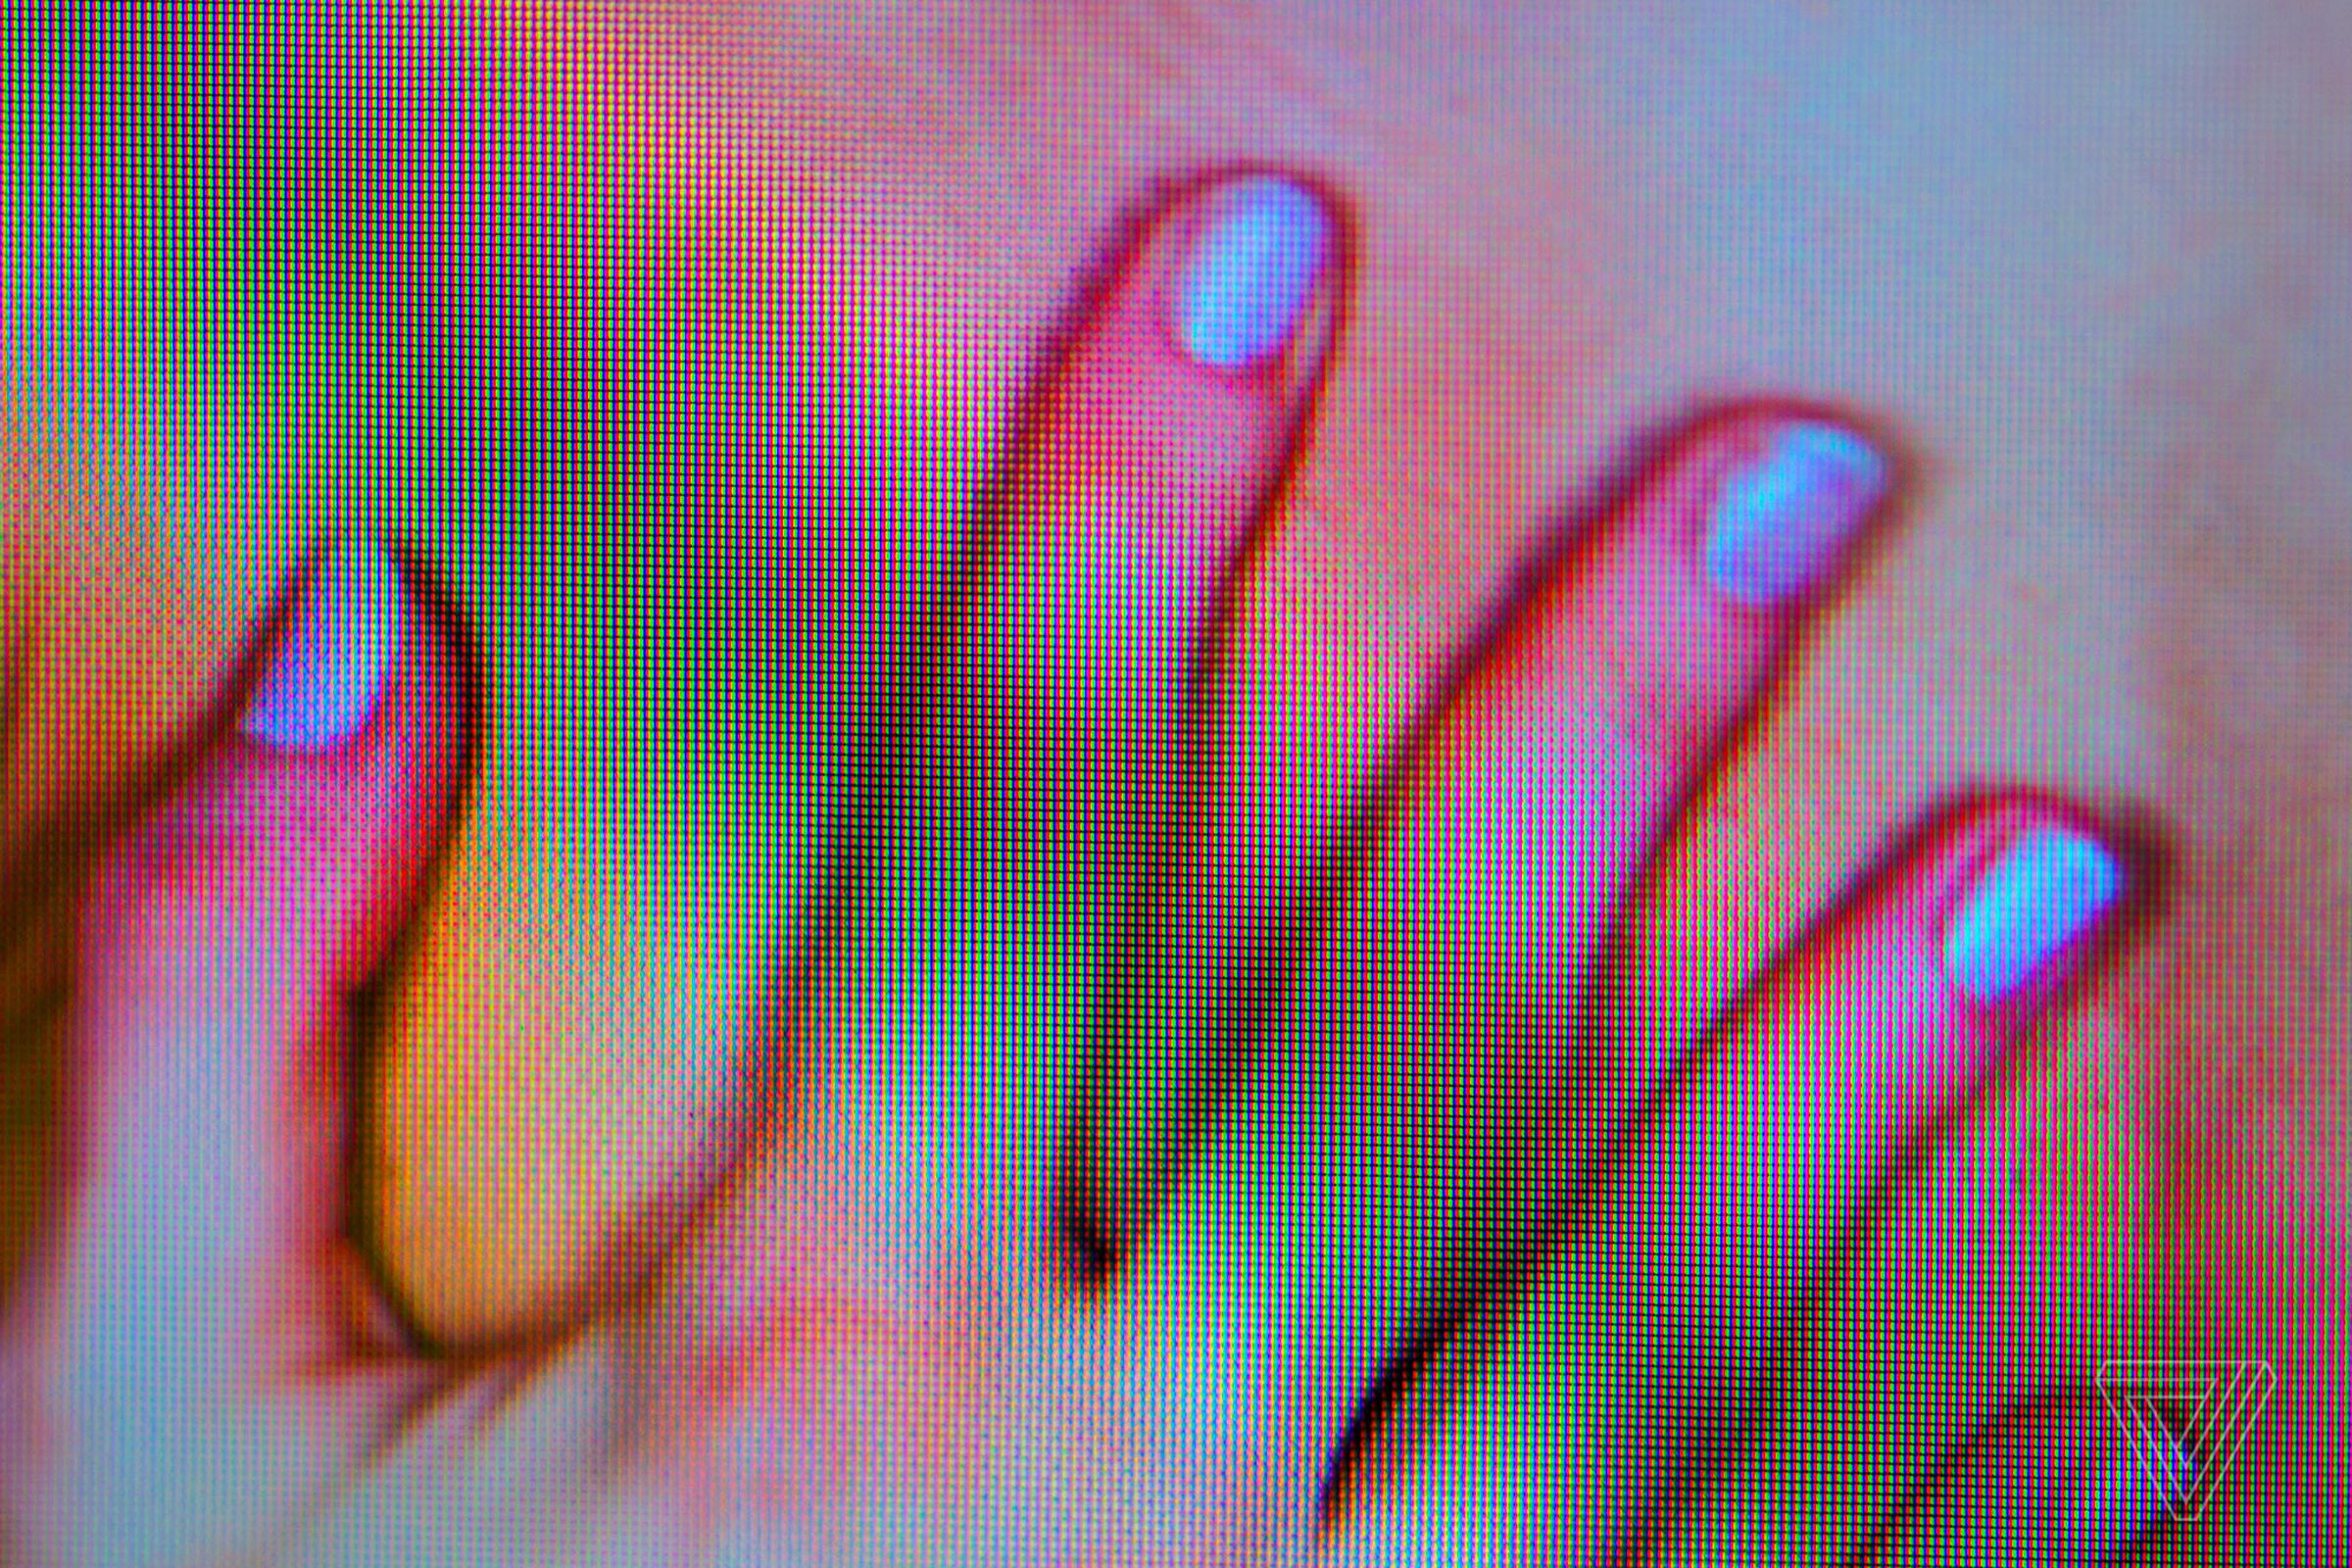 Blurry screenshot of a female hand touching her skin on a device.